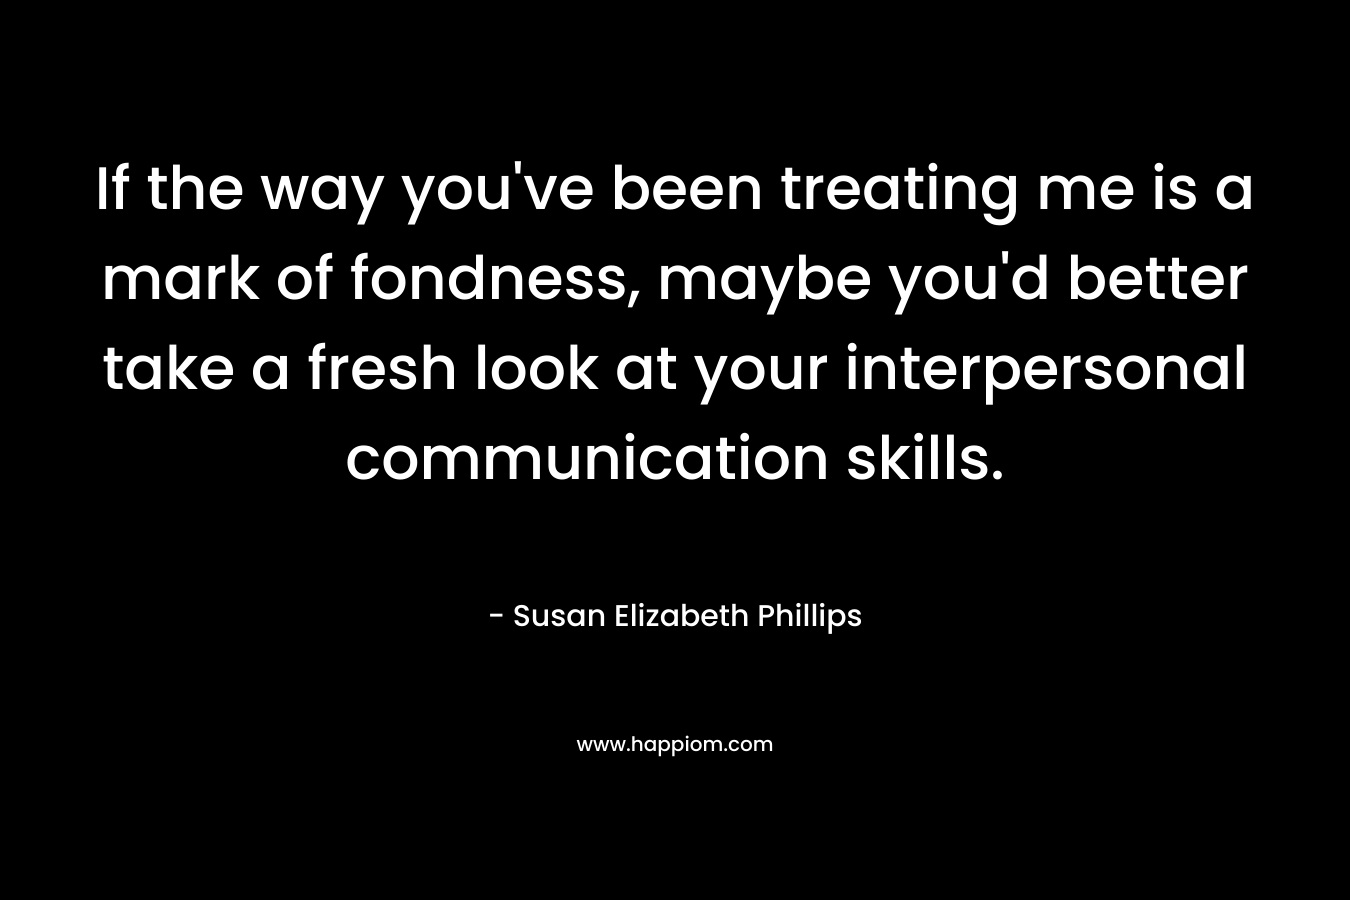 If the way you’ve been treating me is a mark of fondness, maybe you’d better take a fresh look at your interpersonal communication skills. – Susan Elizabeth Phillips